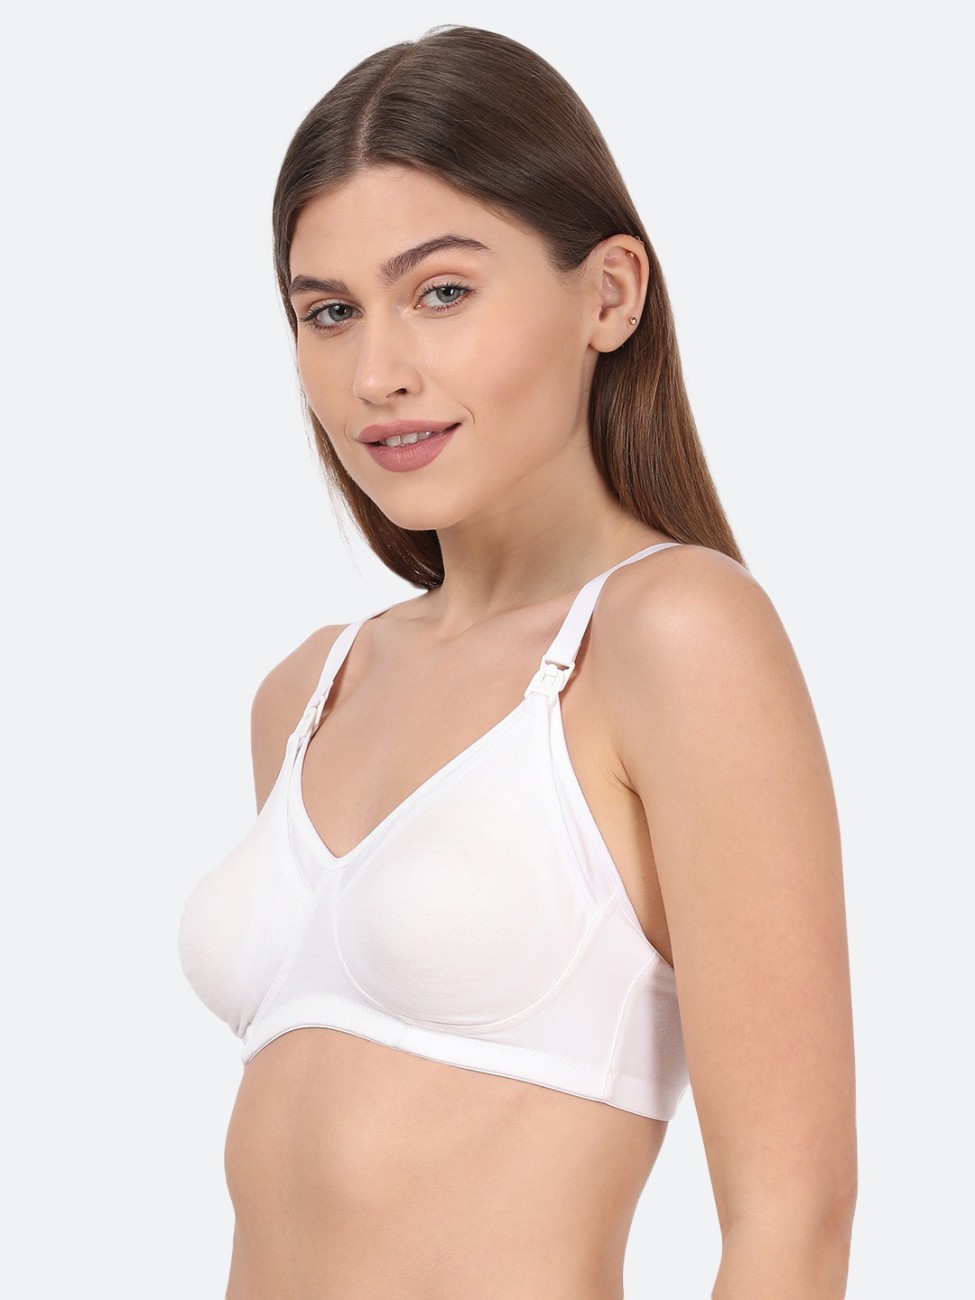 Buy Best Bamboo Padded Bra Online in India - The Putchi